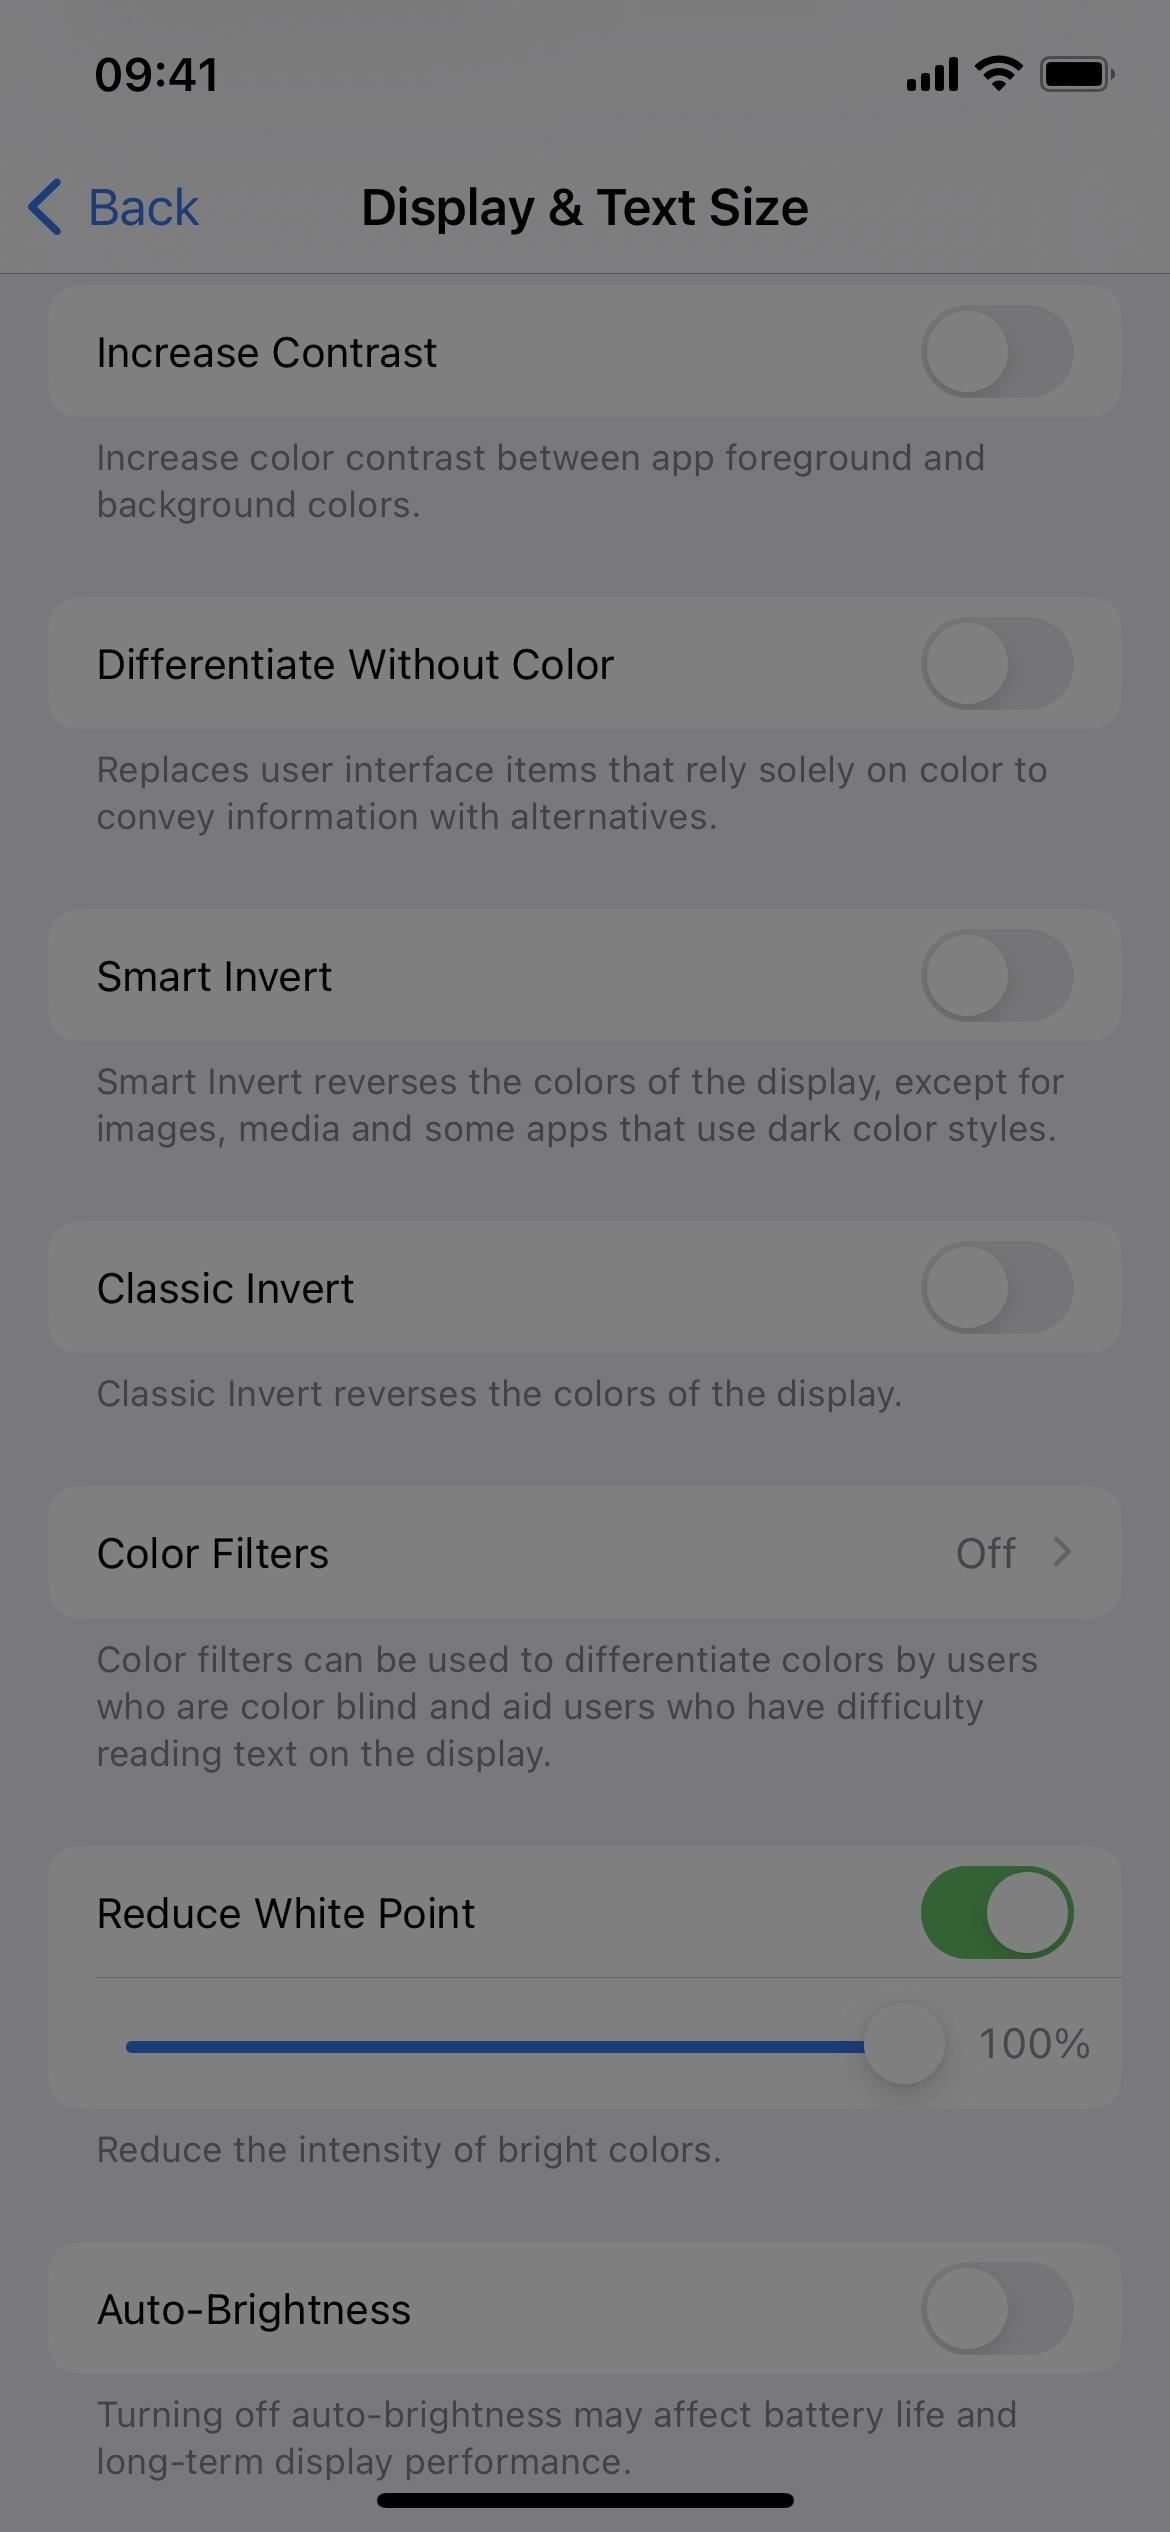 Customize Colors for All the Apps on Your iPhone to Match How You Use Them Most (Or Just for Fun)